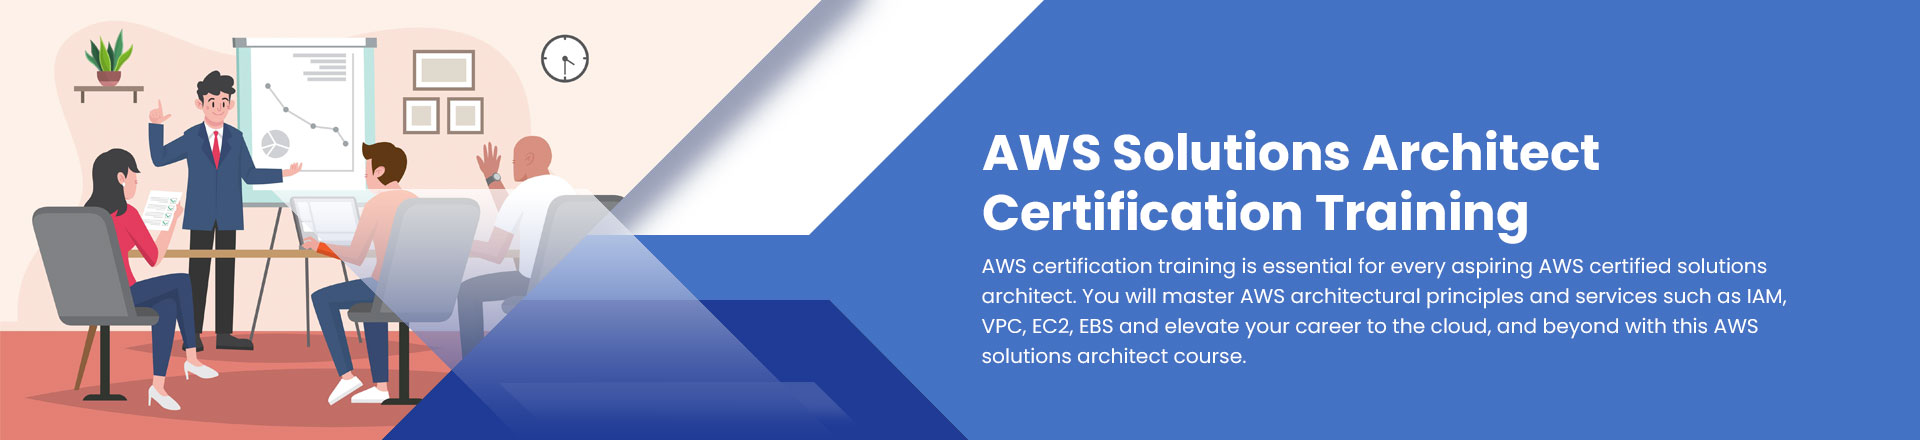 aws solutions architect course